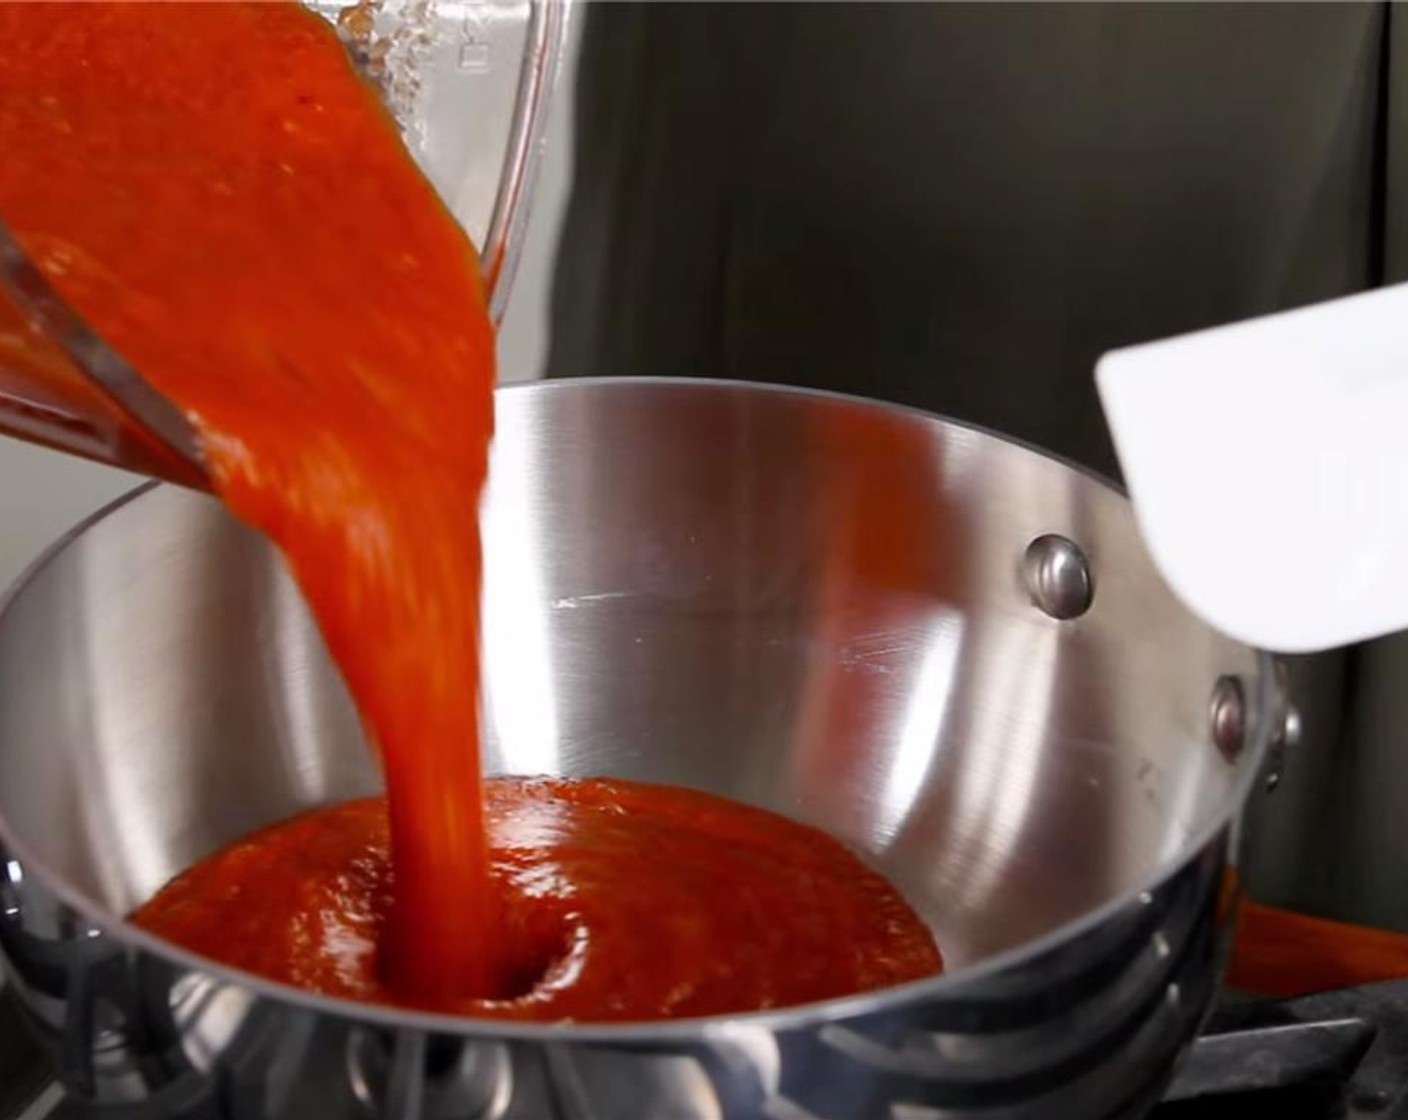 step 11 Pour the tomato mixture into a 2-quart saucepan. Cook over medium-high heat for 15 minutes or until the sauce is thickened. Season to taste.